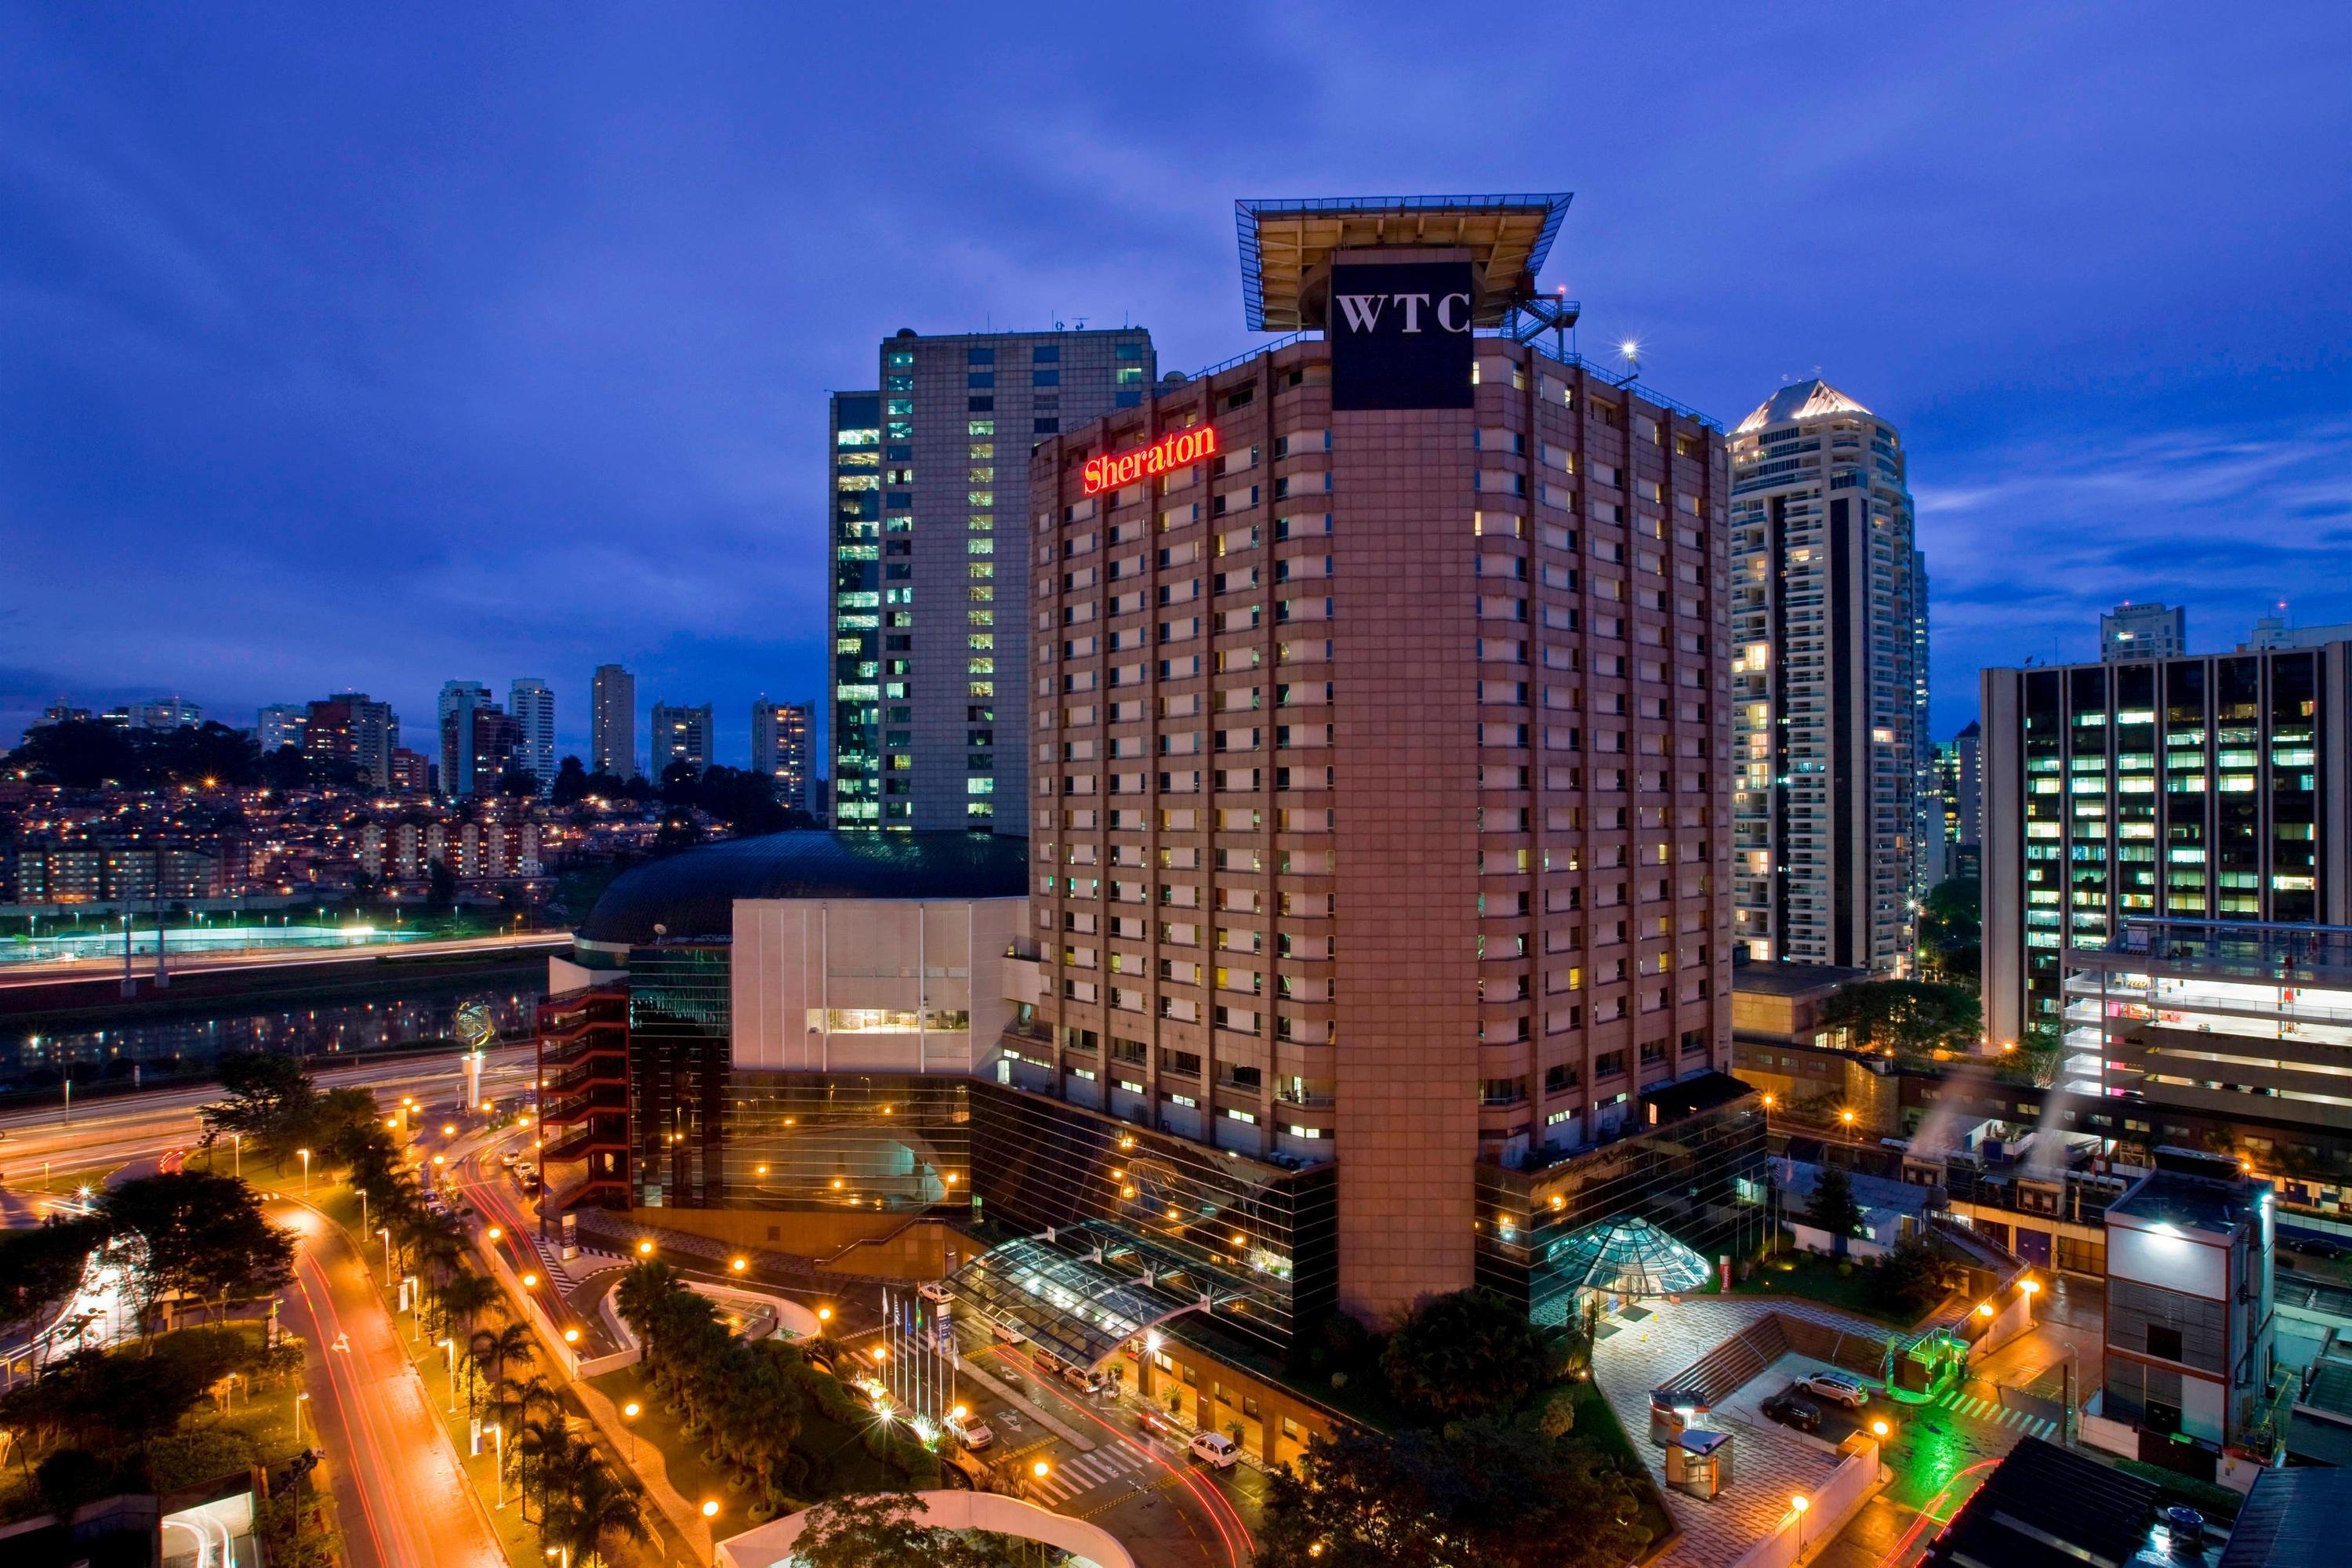 16 Best Hotels in Sao Paulo. Hotels from $15/night - KAYAK